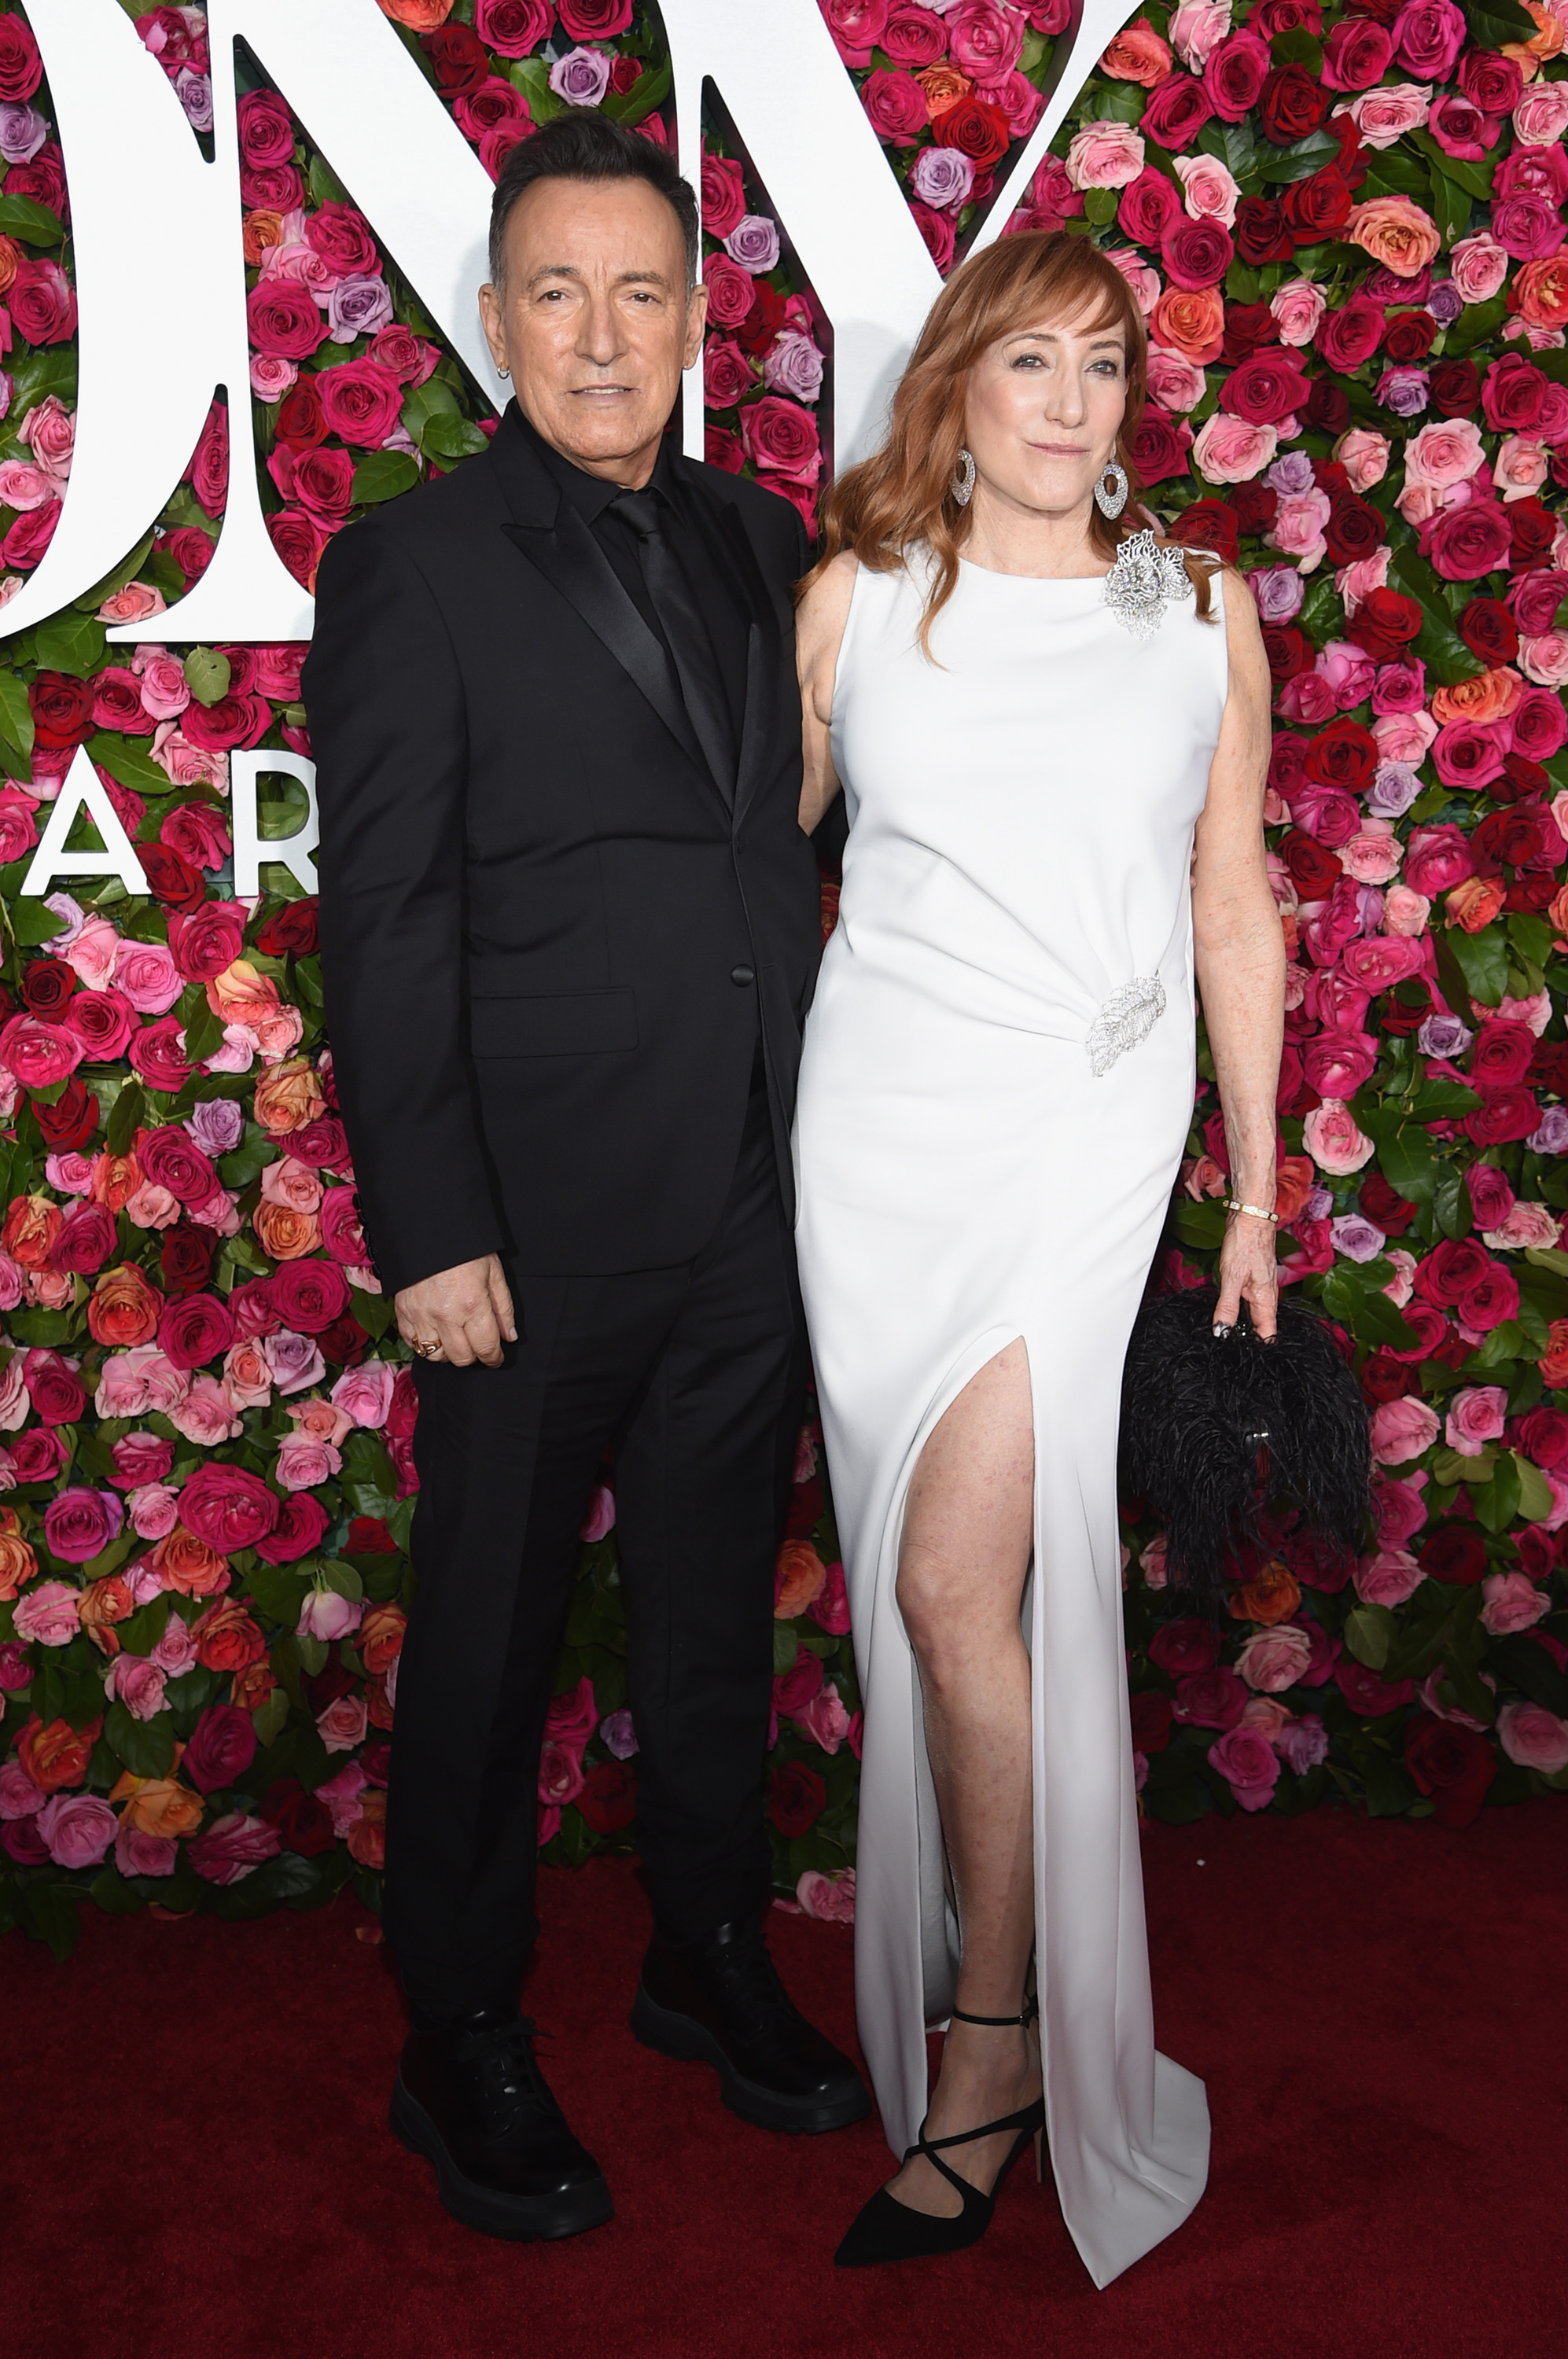 Bruce Springsteen and Patti Scialfa in New York City on June 10, 2018 | Source: Getty Images